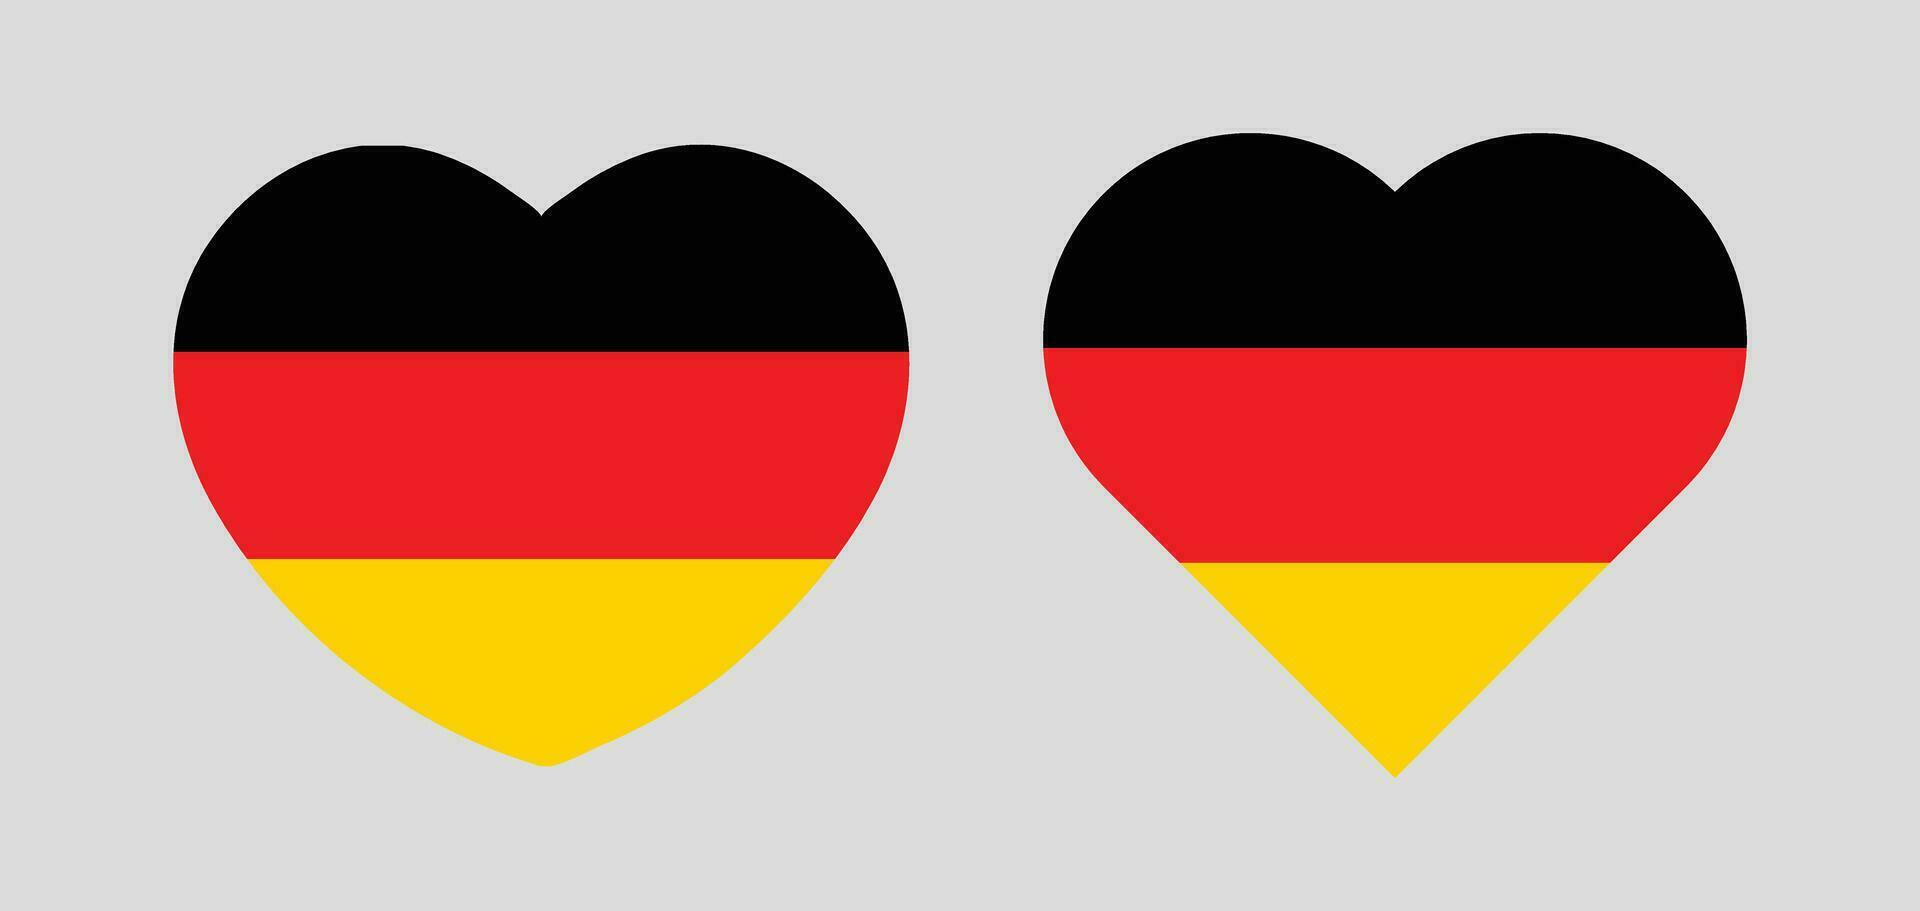 Flat heart shaped Illustration of Germany flag Free Vector. vector